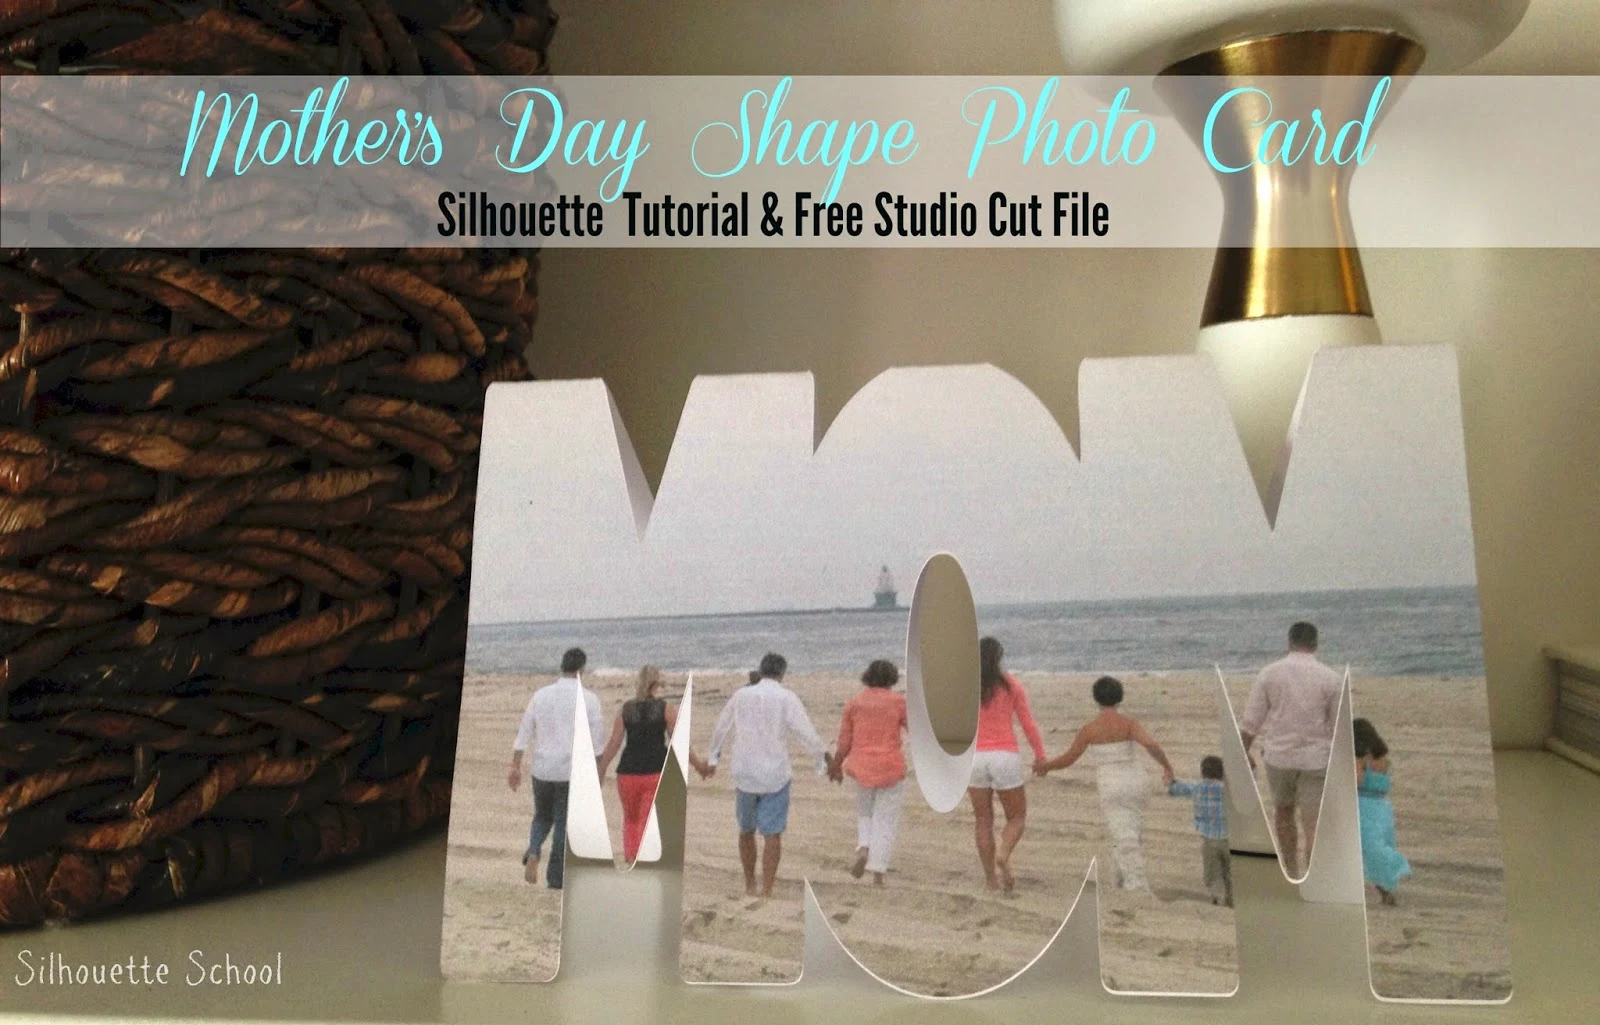 Silhouette Studio, free cut file, Mom card, Mother's Day, Silhouette tutorial